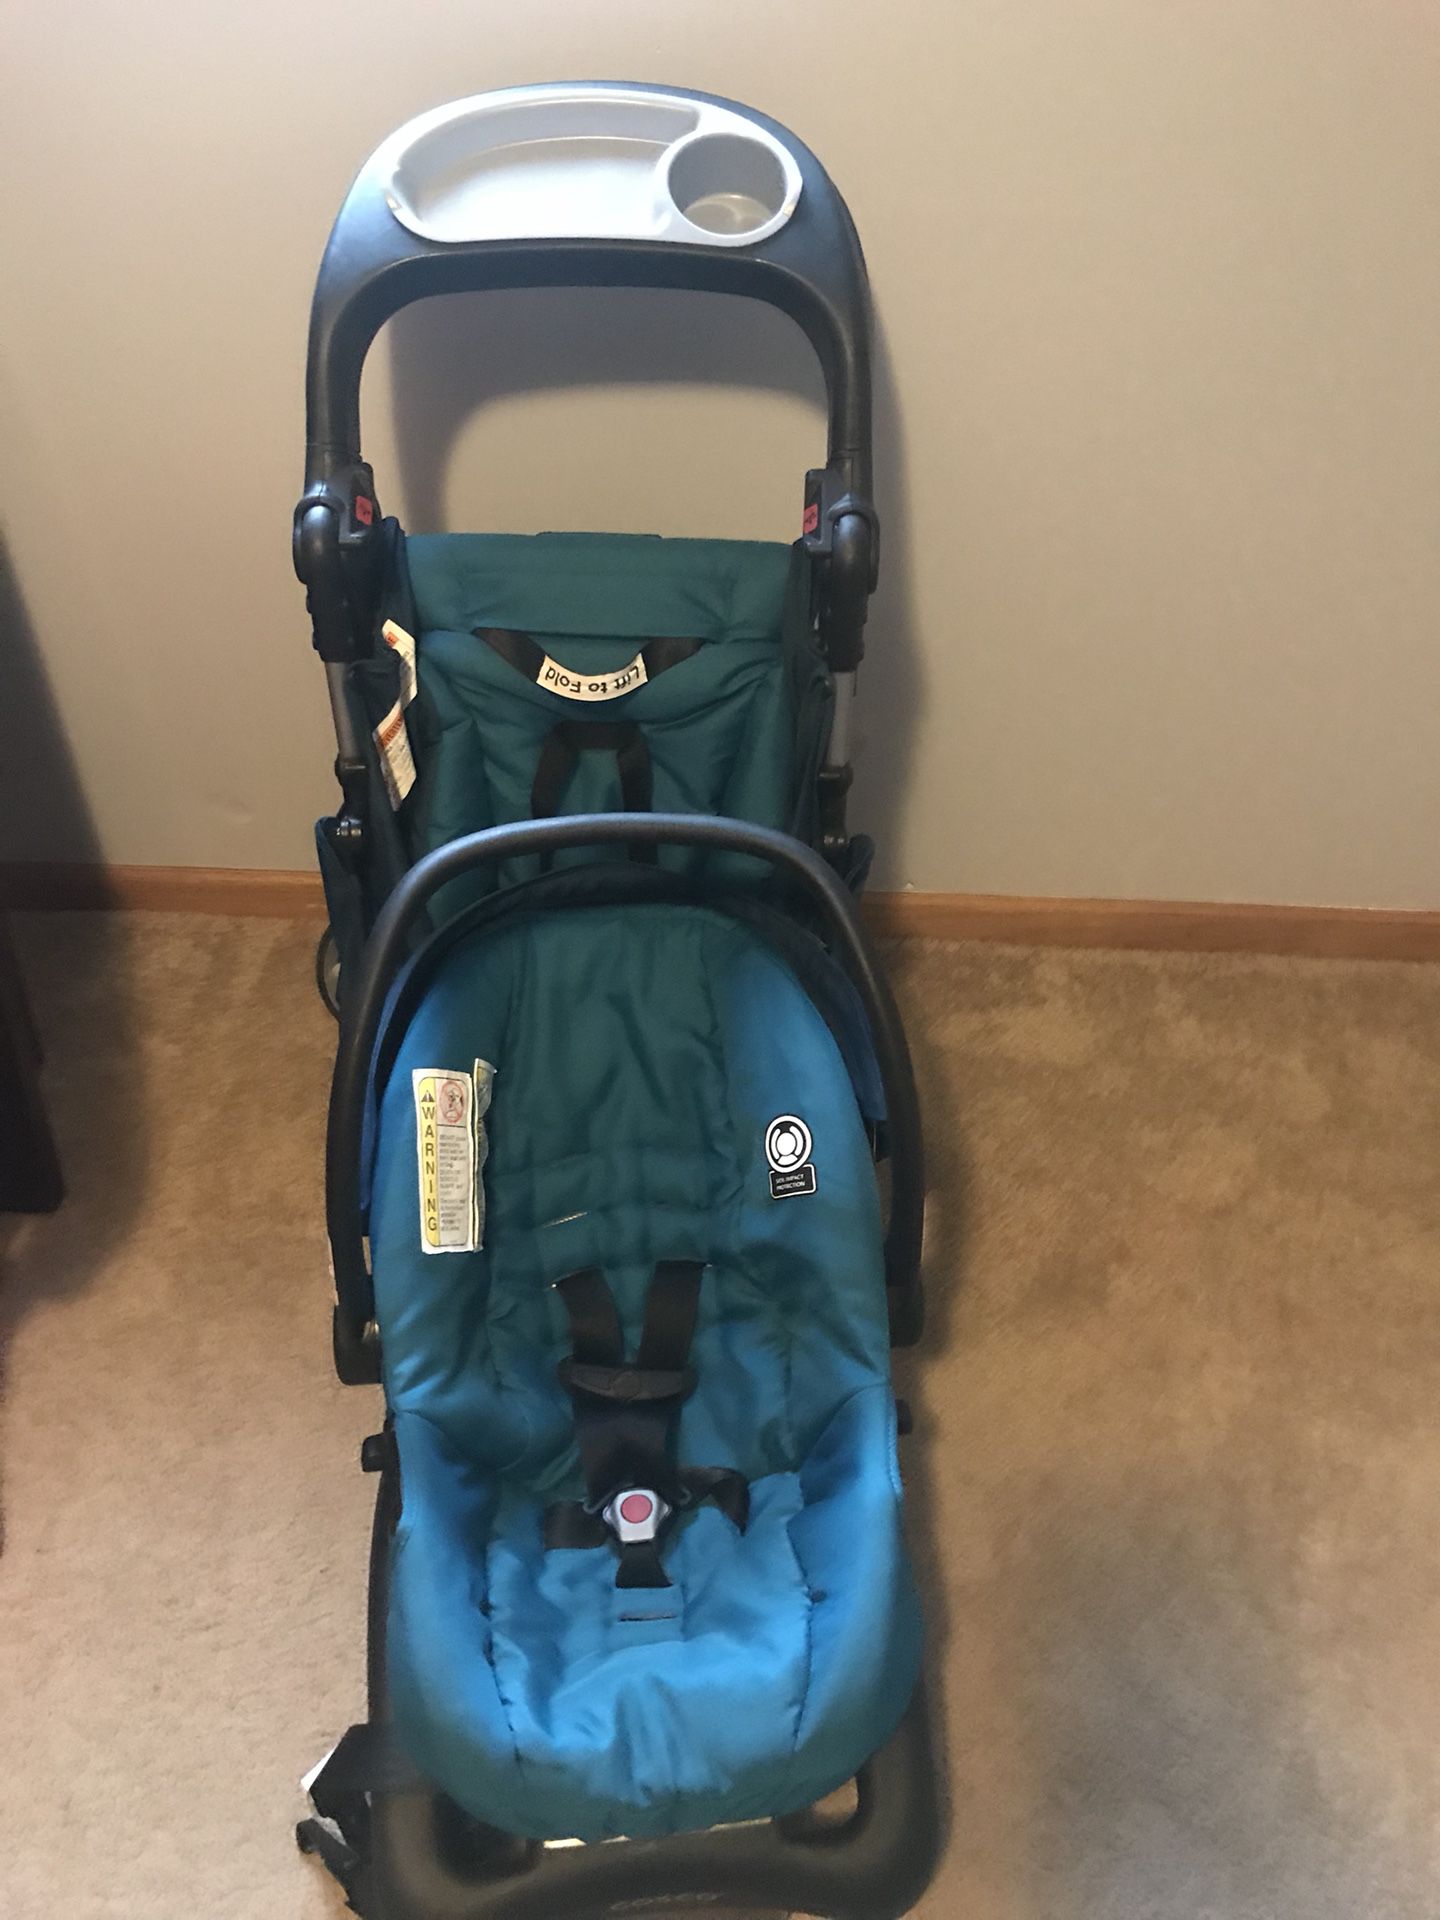 Car seat, base and stroller combo